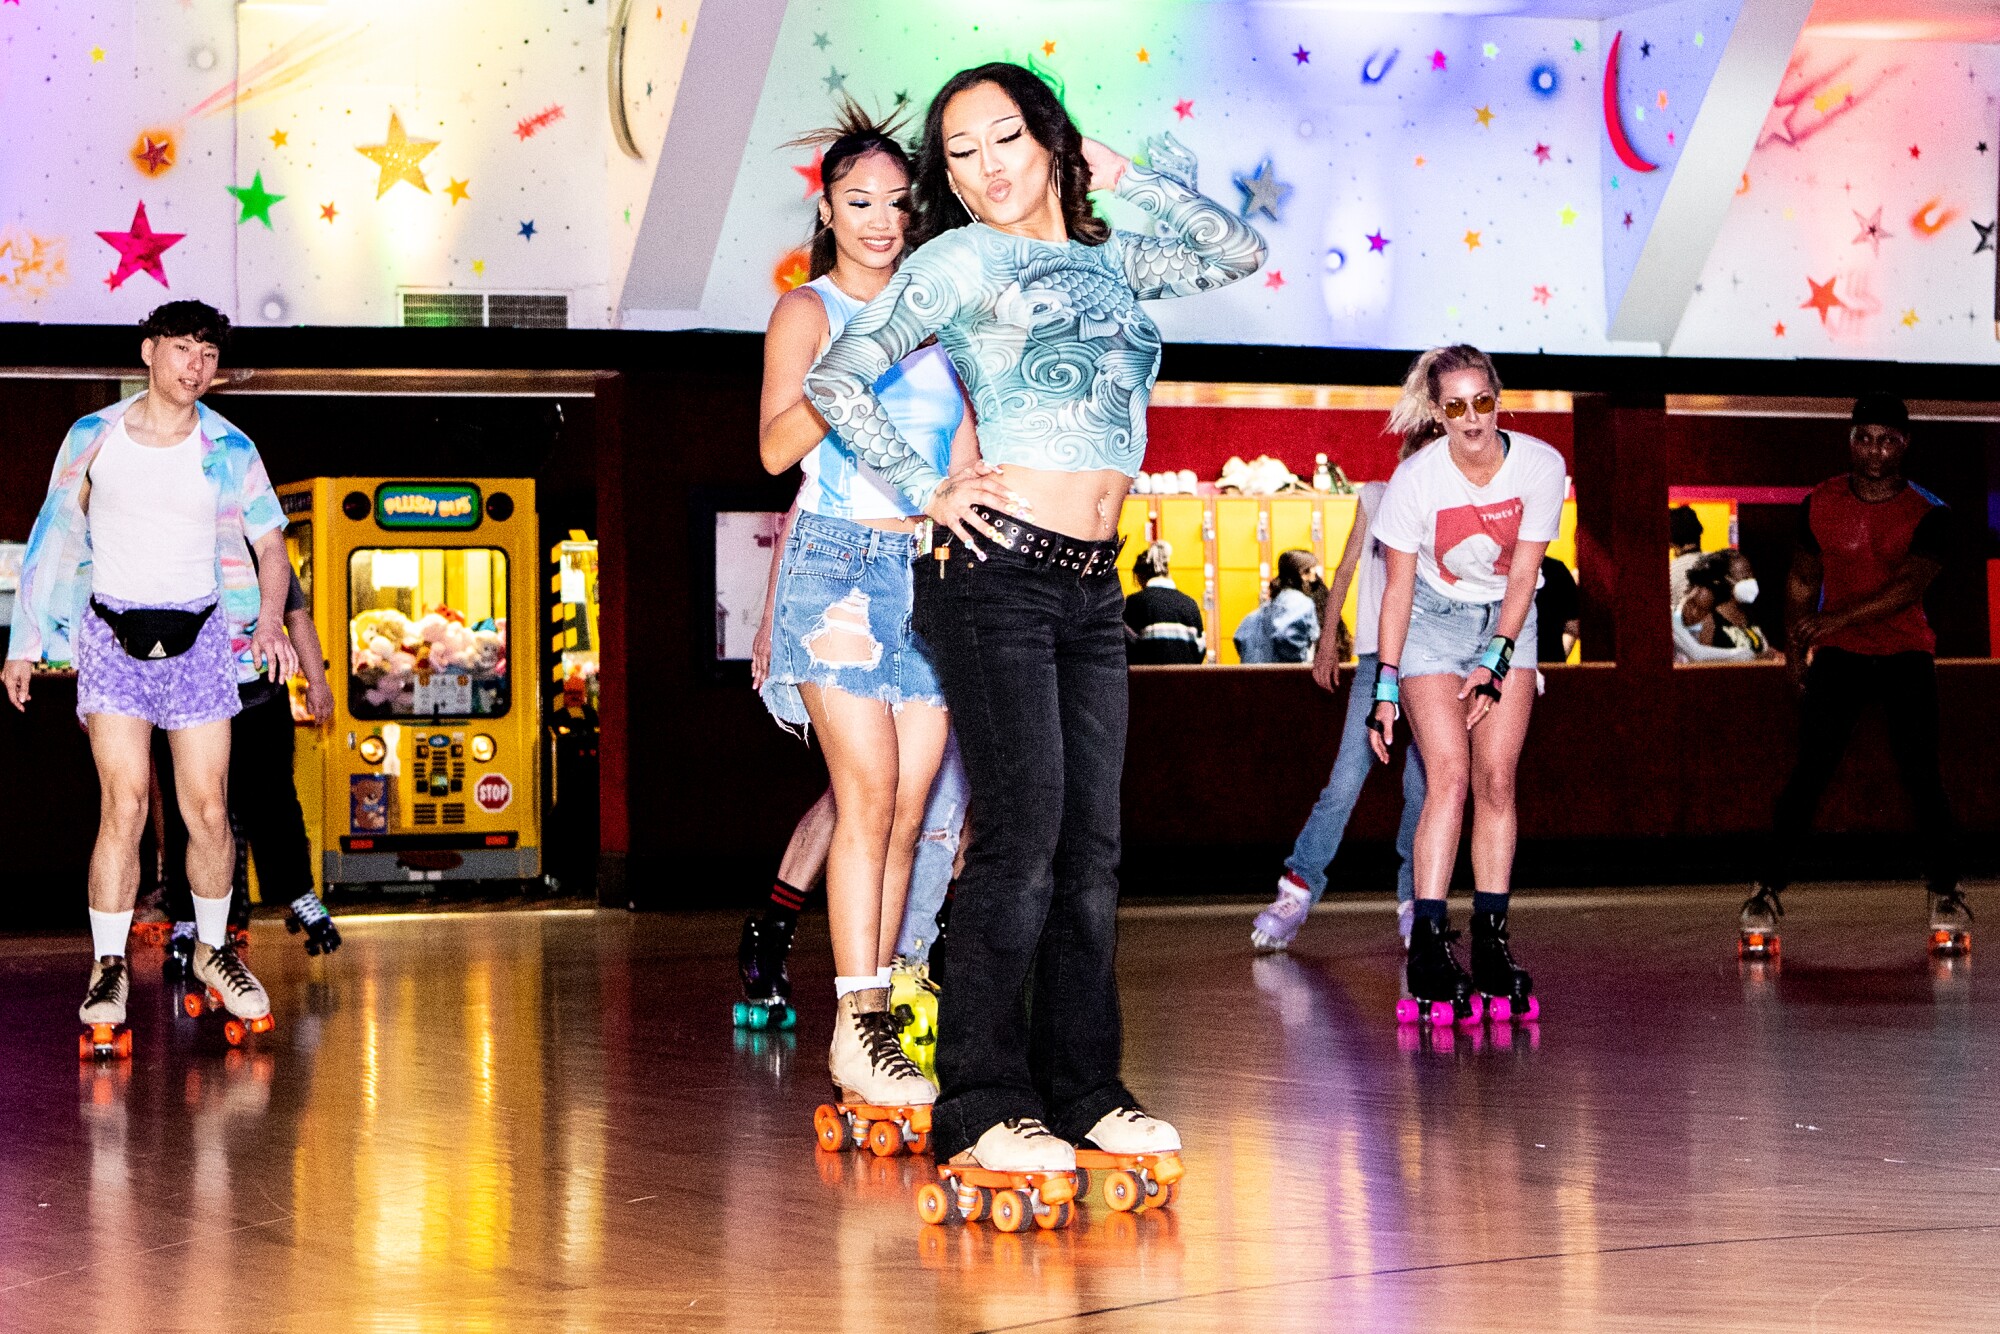 A person strikes a pose in the middle of the roller rink.